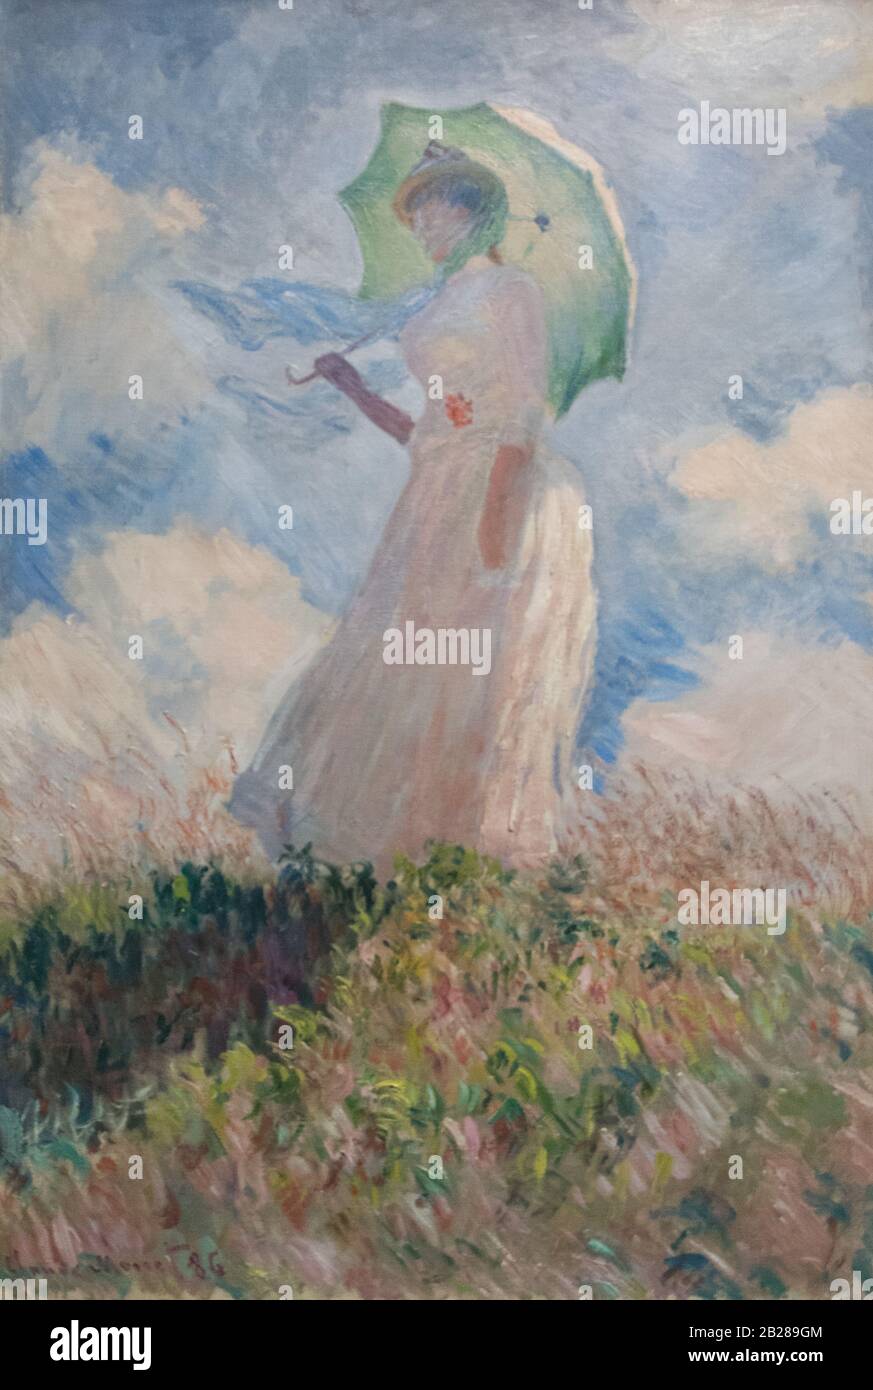 Woman with a Parasol, Essai de figure en plein-air (Study of a Figure Outdoors, Facing Left) Painting by Claude Monet - Very high resolution / quality Stock Photo